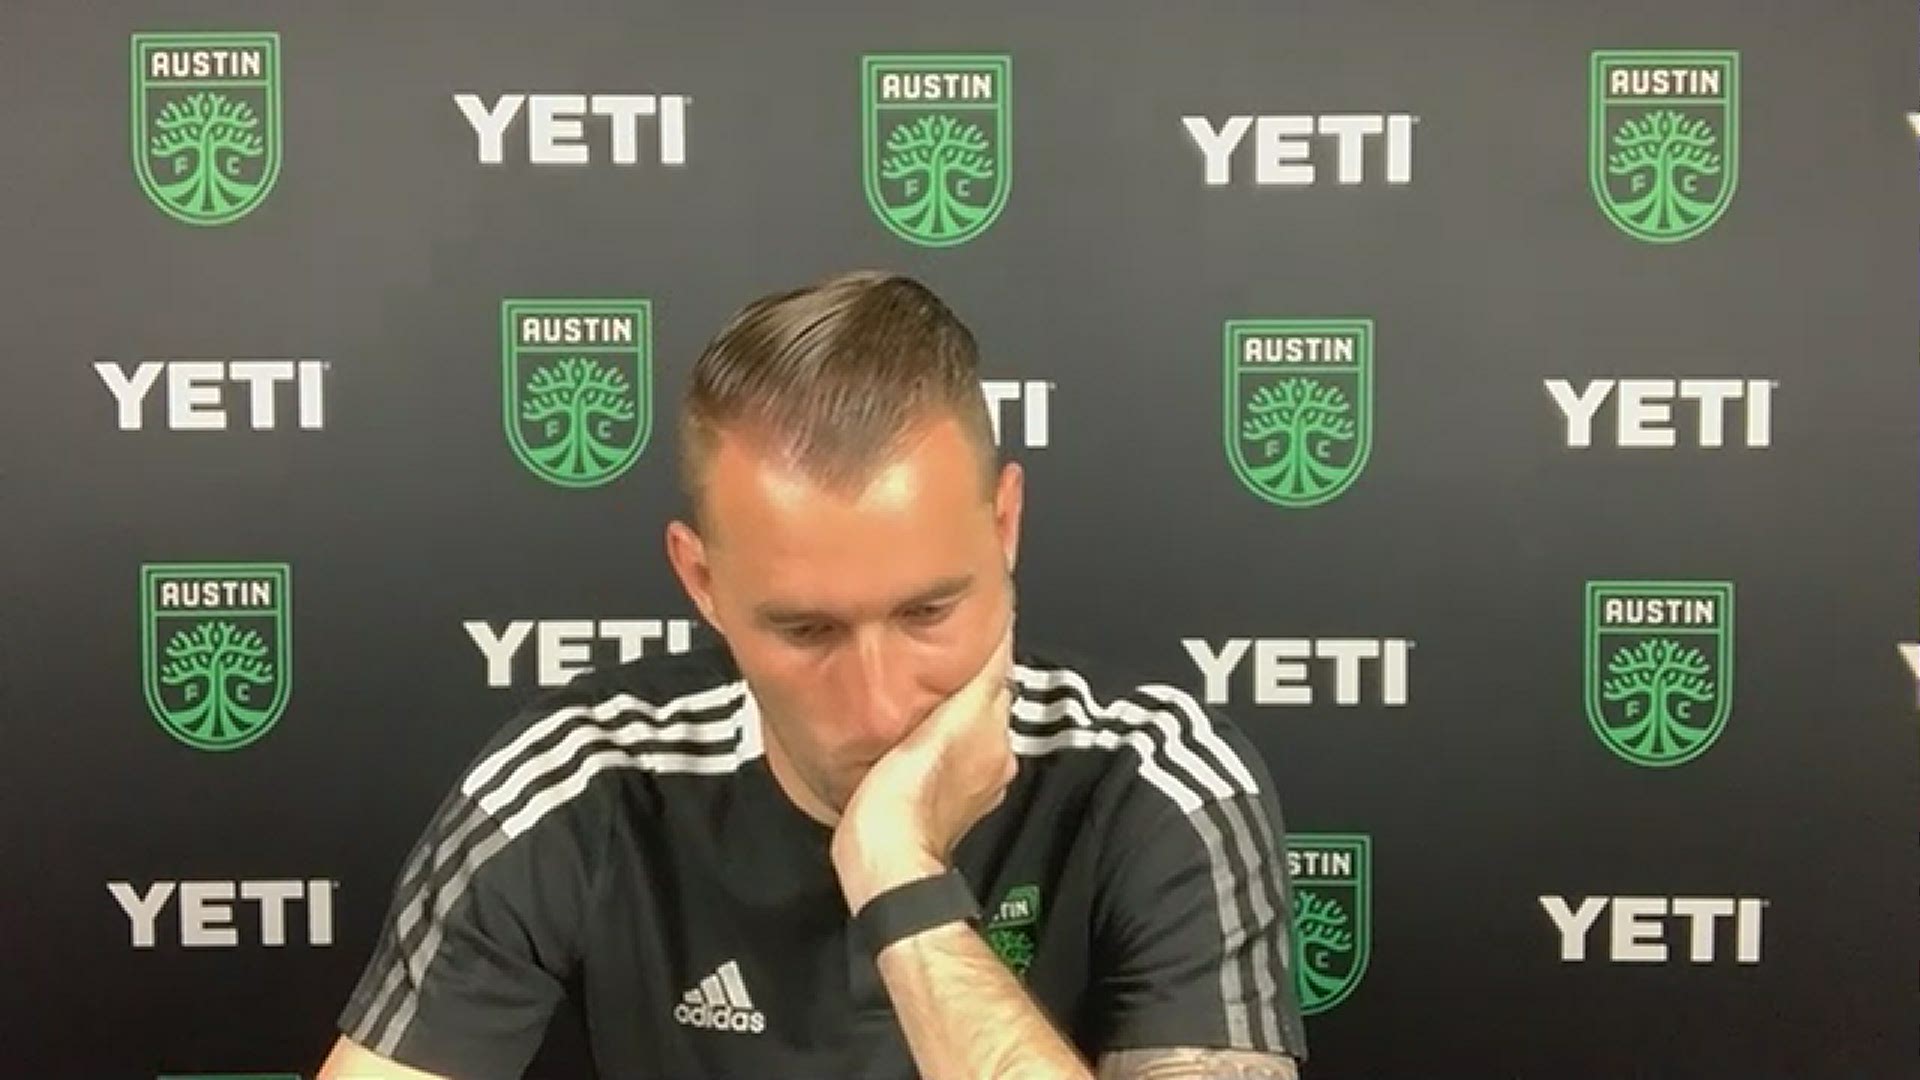 Austin FC goalkeeper Brad Stuver speaks with the media after a 1-1 draw against Sporting KC on June 12, 2021.